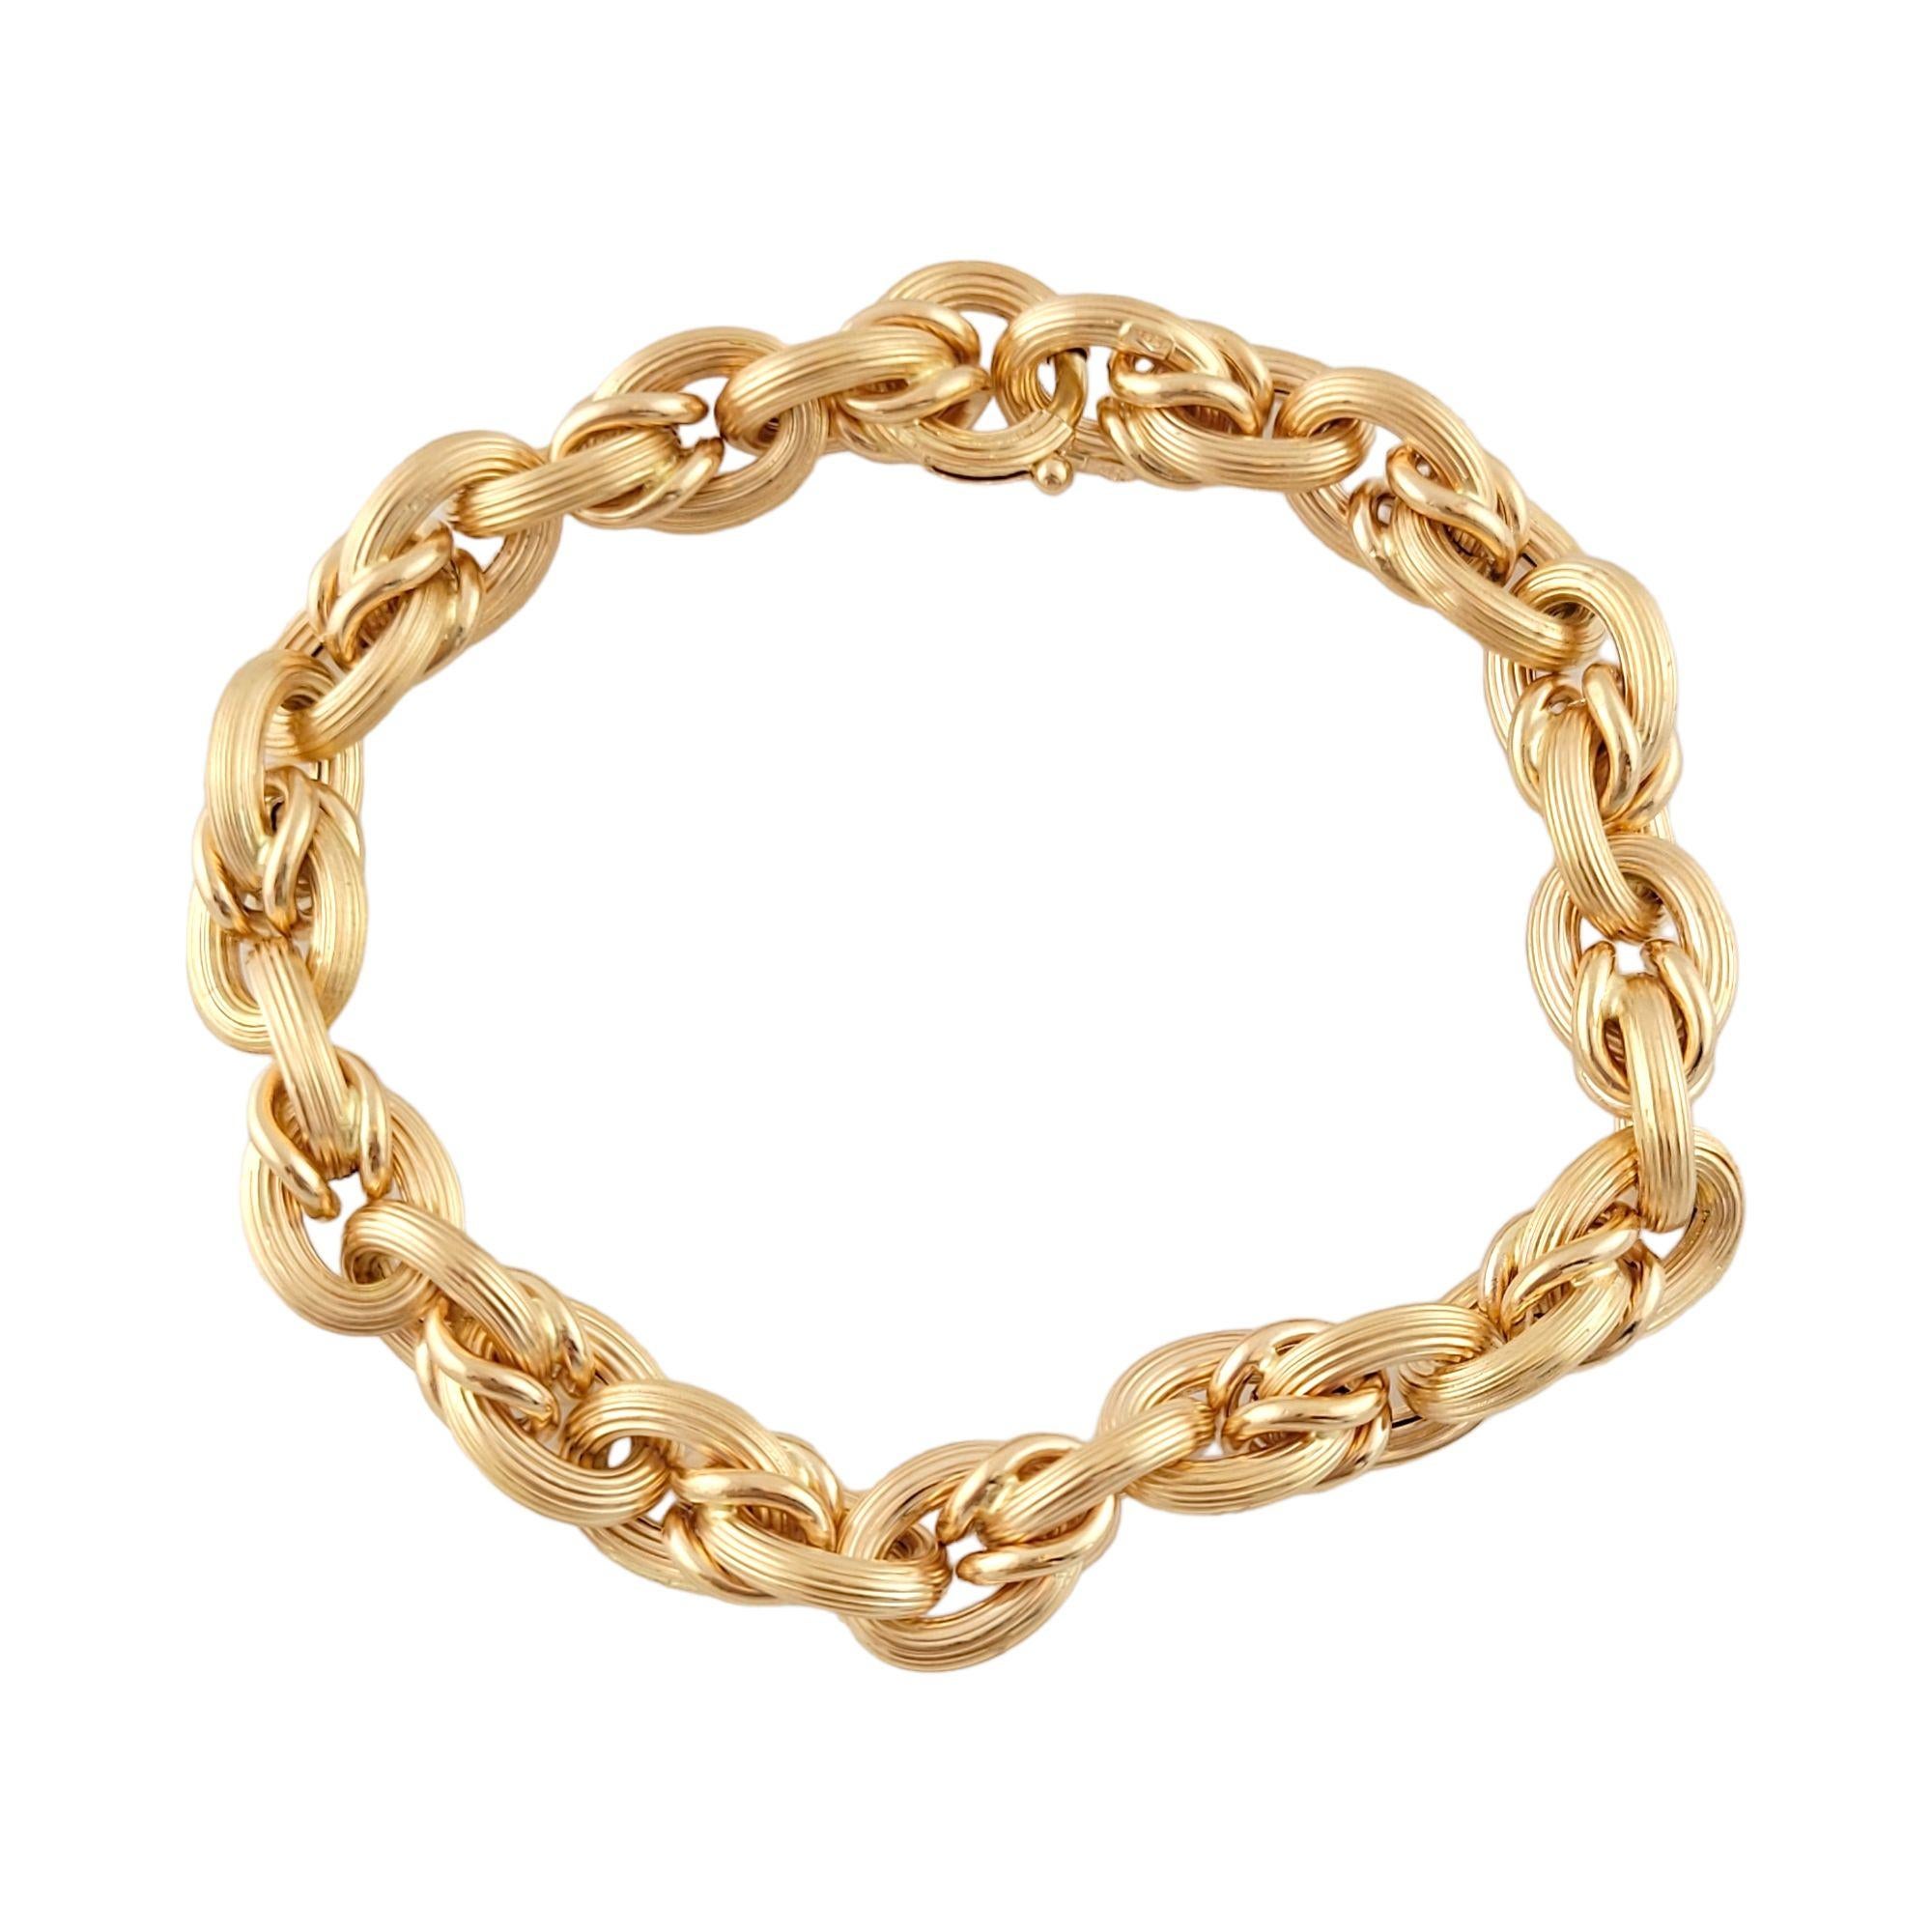 Vintage 18K Yellow Gold Textured Link Bracelet

This gorgeous 18K yellow gold bracelet has it's own unique textured touch!

Chain Length: 8.5